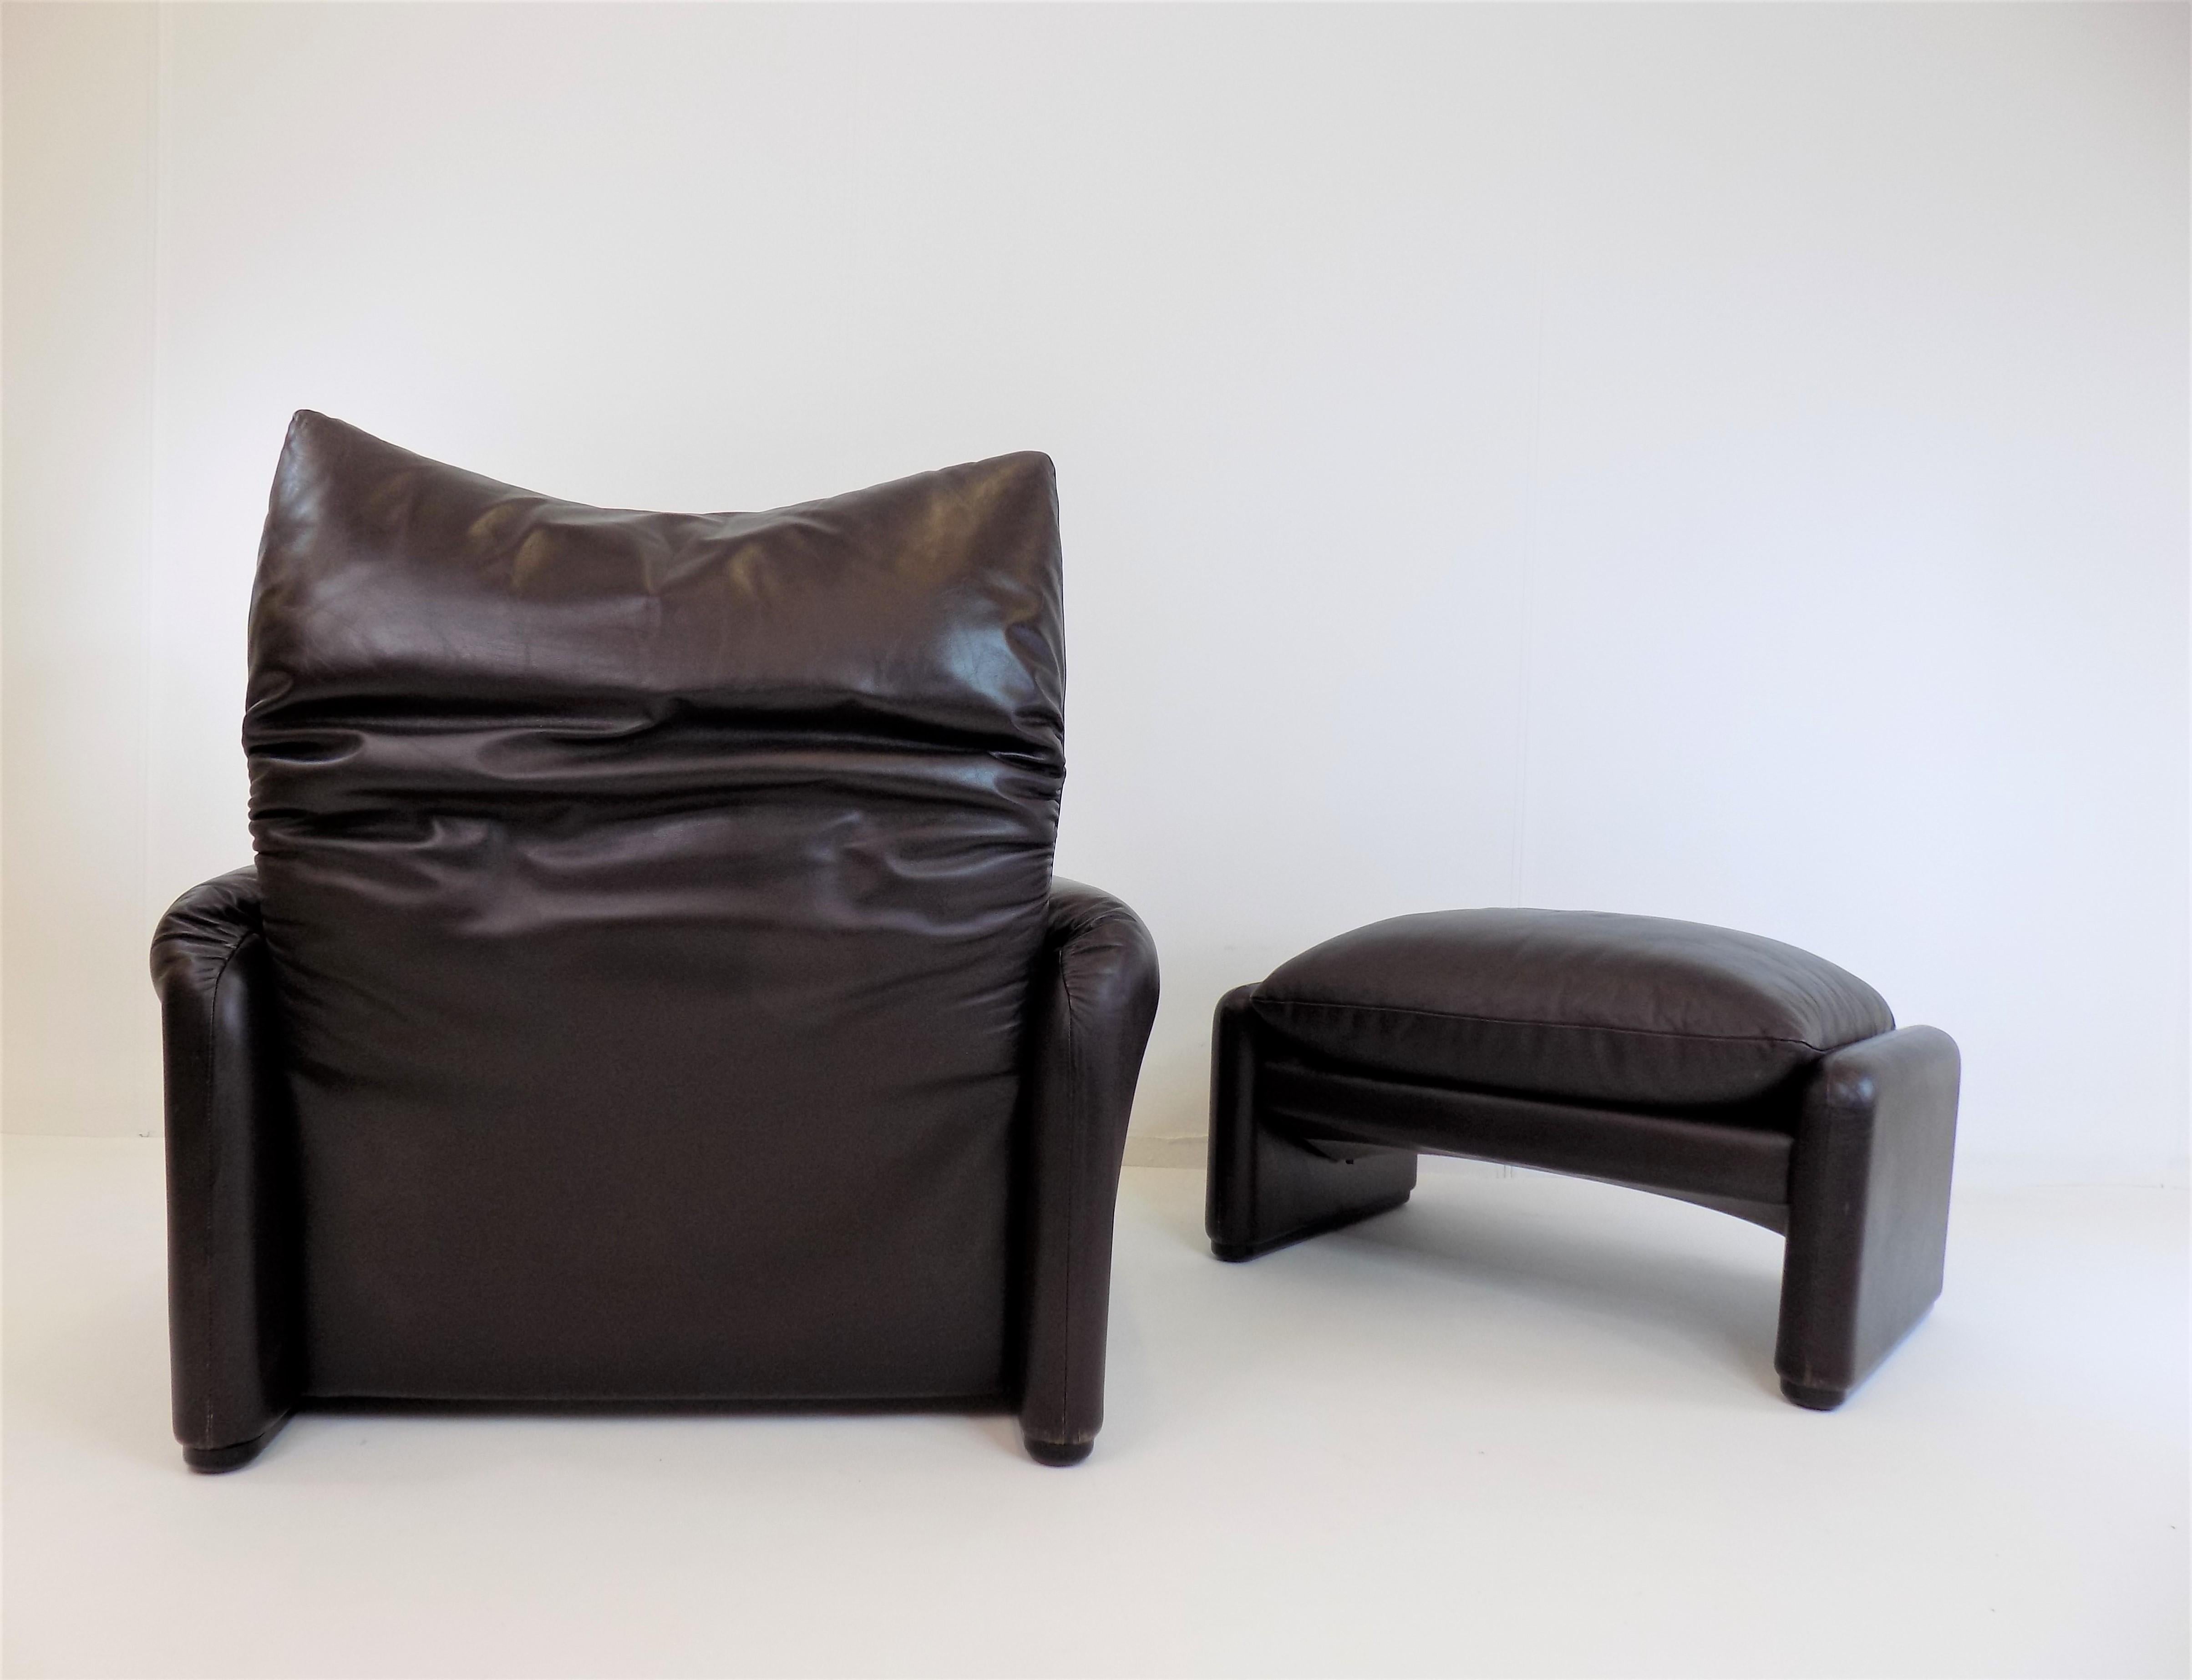 Cassina Maralunga Leather Armchair with Ottoman by Vico Magistretti 1